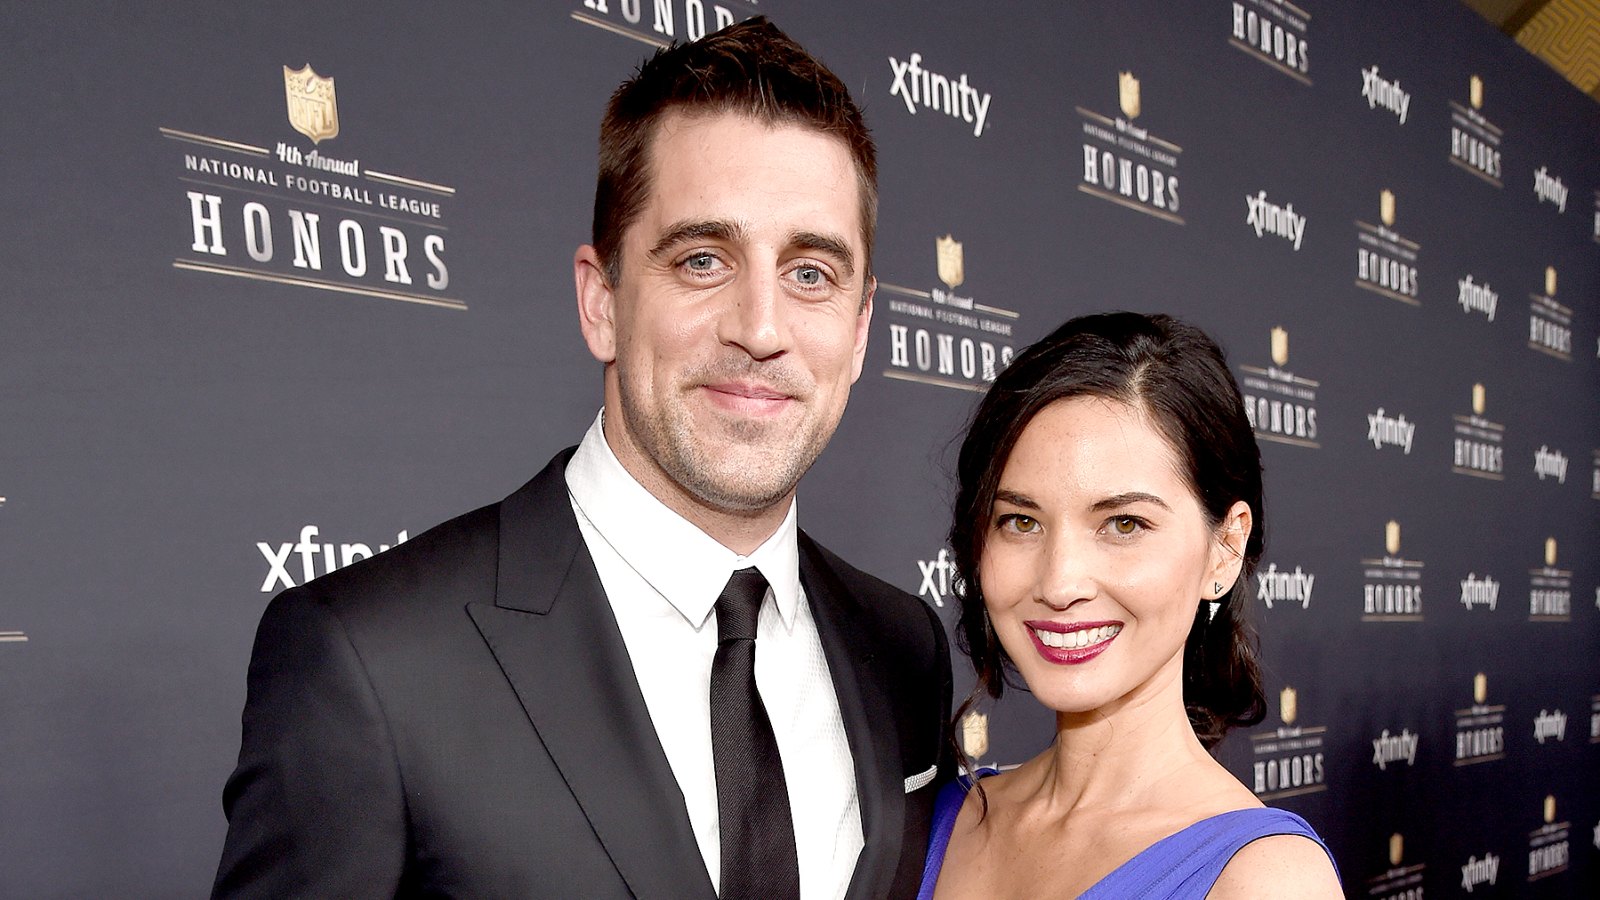 Aaron Rodgers and Olivia Munn attend 4th Annual NFL Honors at Phoenix Convention Center on January 31, 2015 in Phoenix, Arizona.